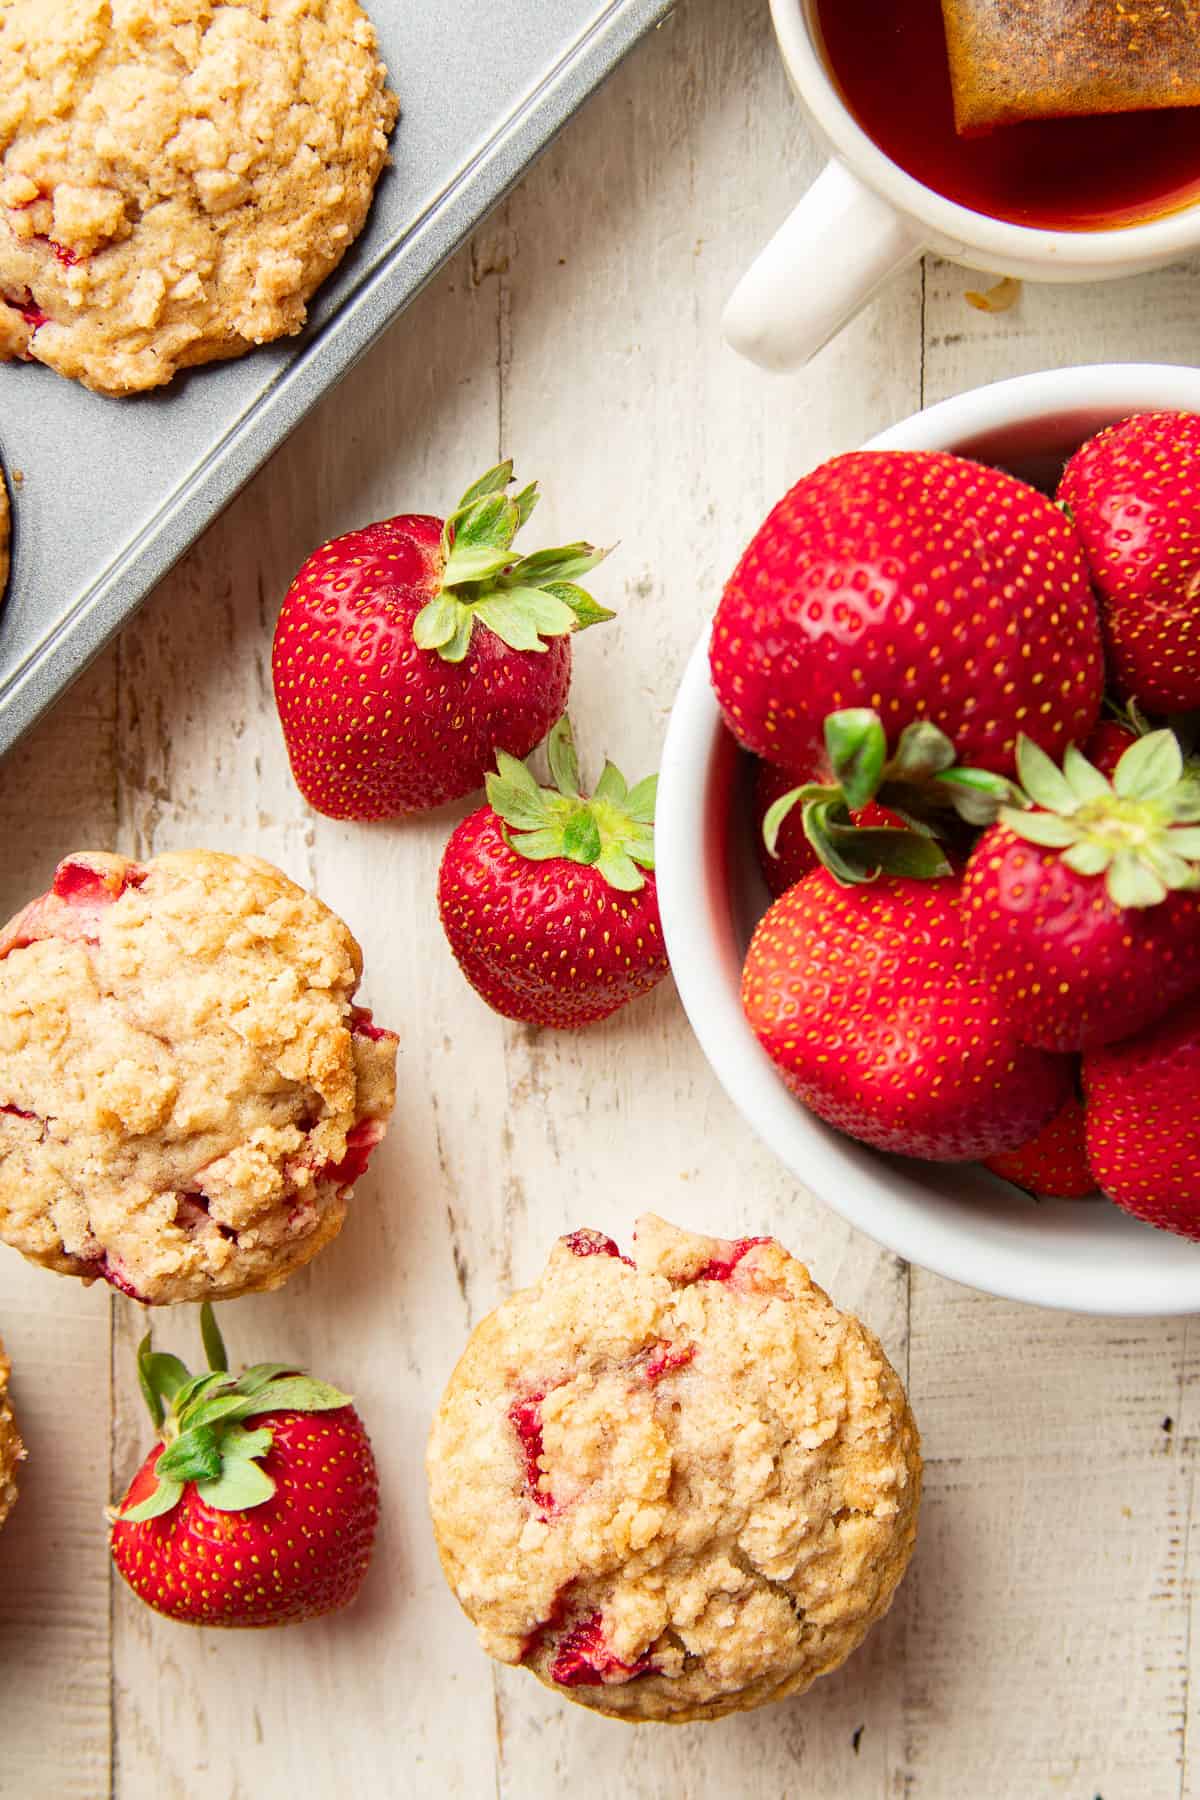 Vegan Strawberry Muffins and fresh strawberries on a white wooden surface.